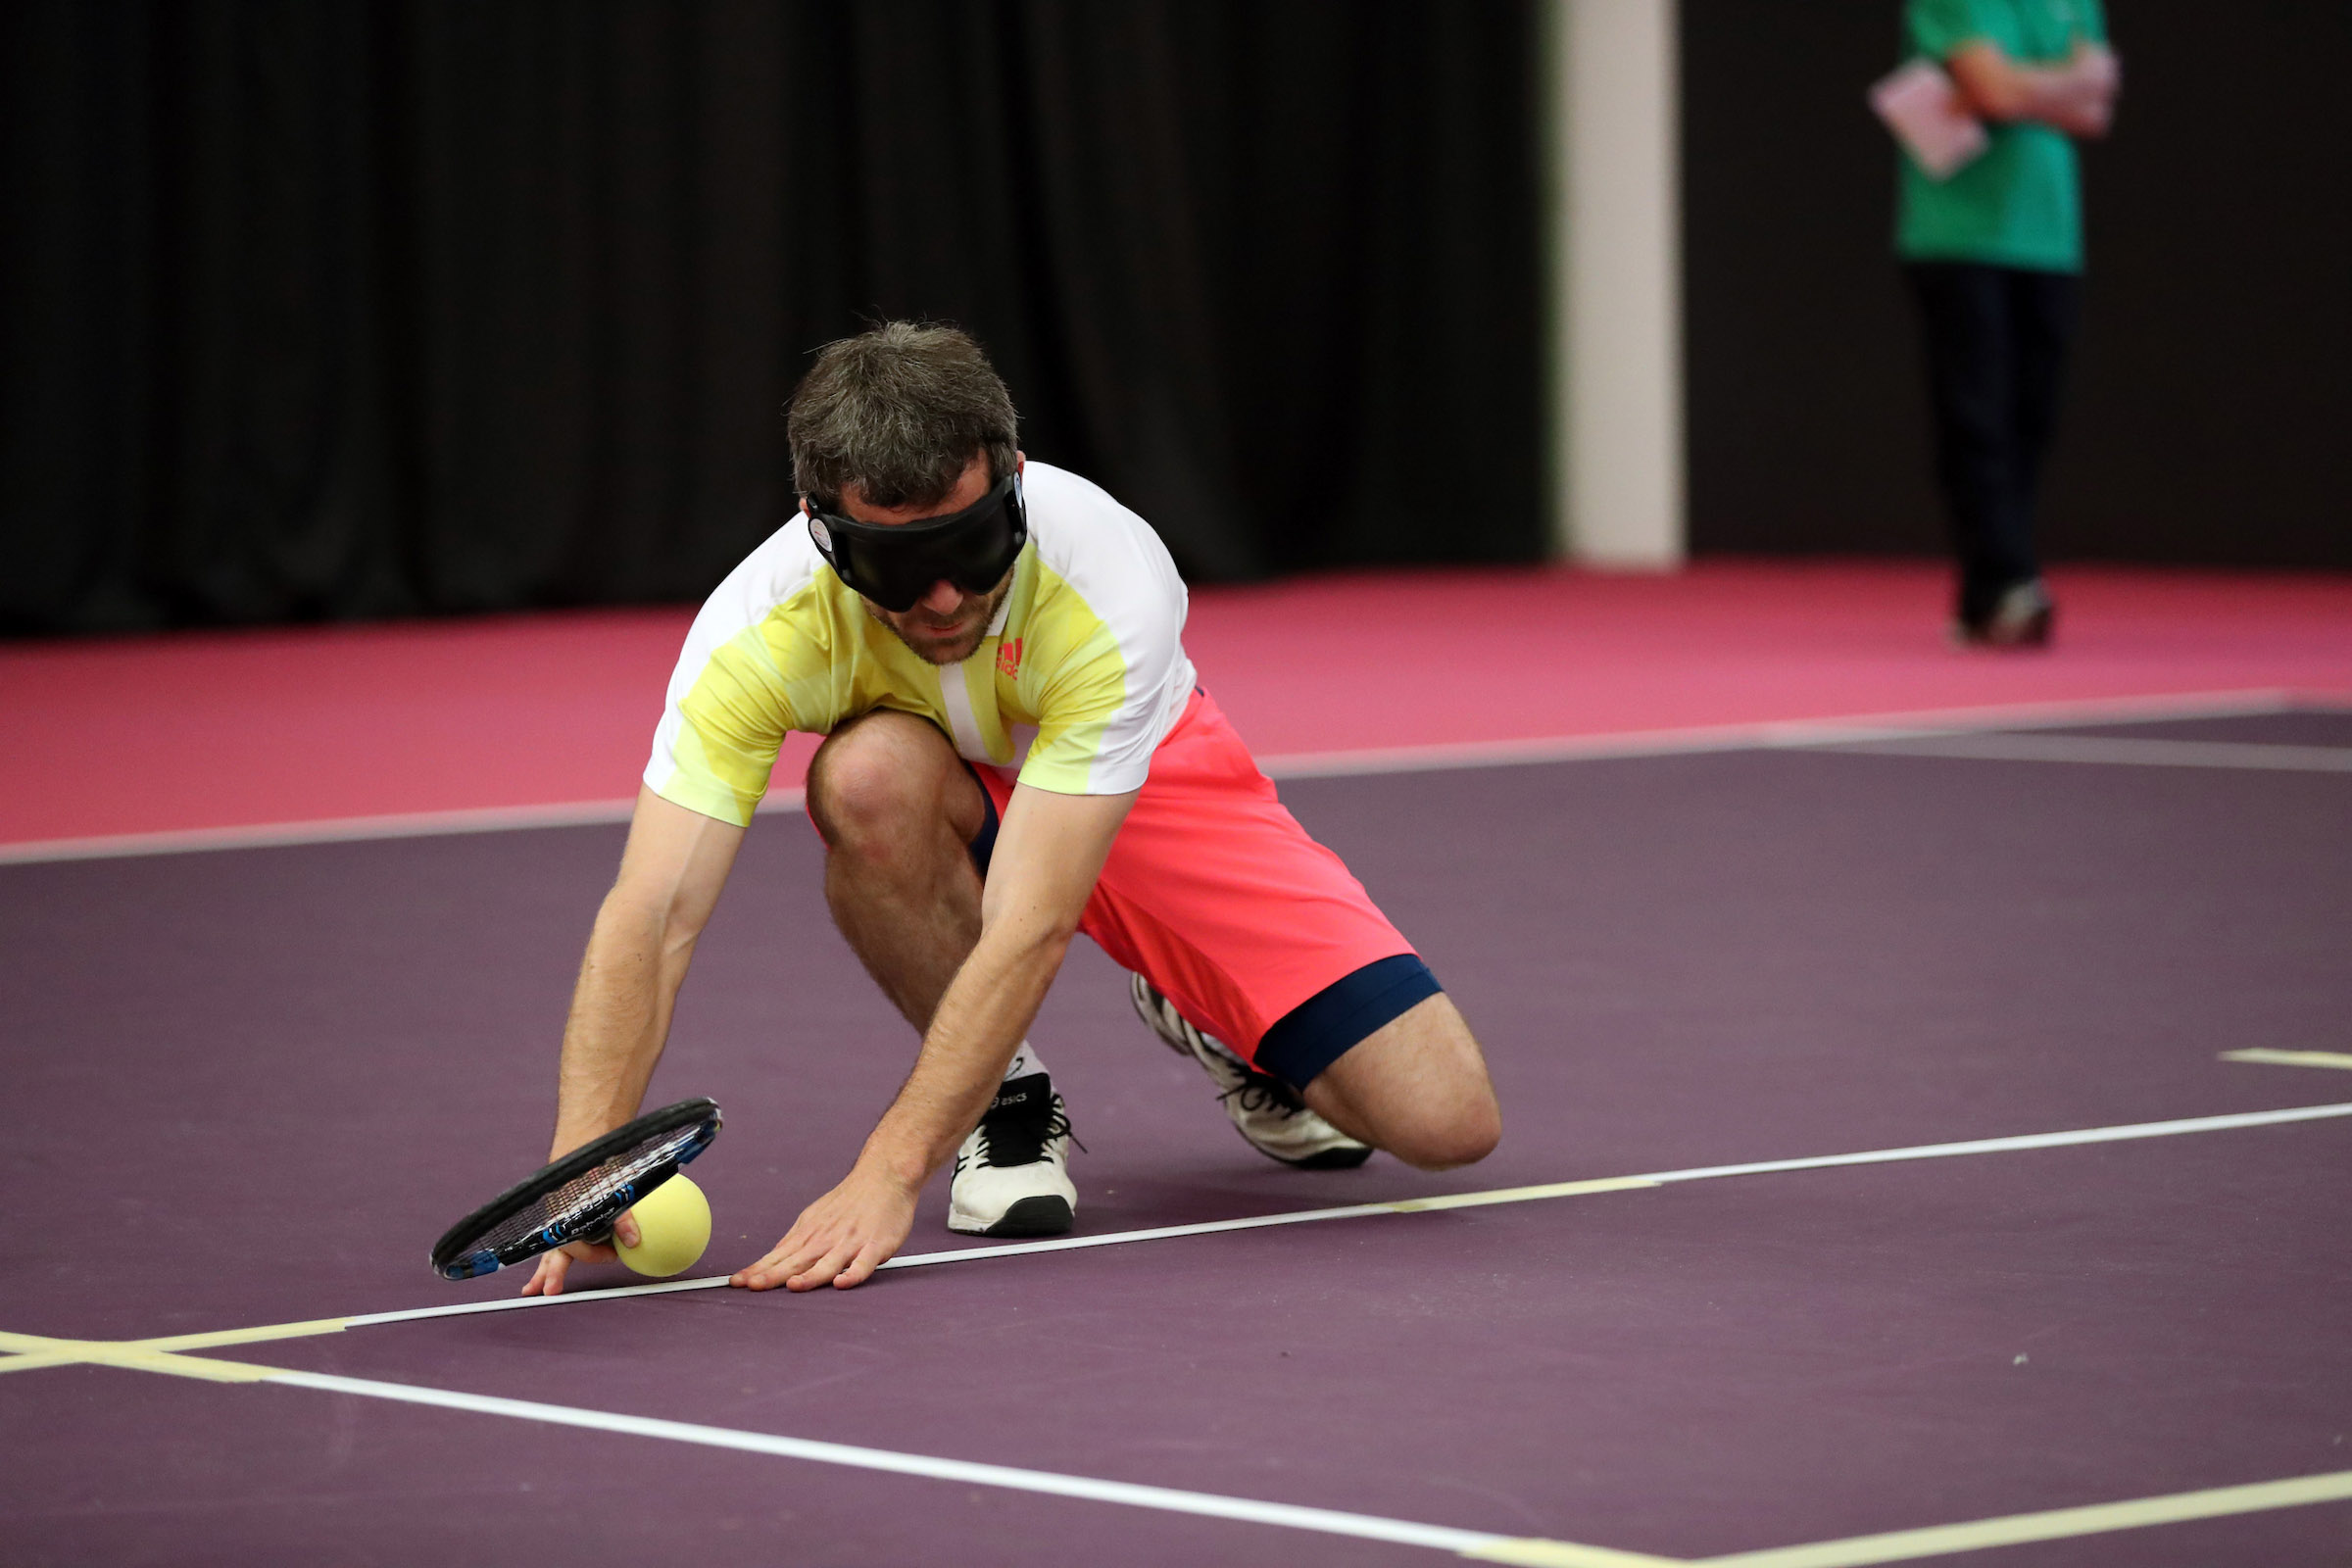 Visually Impaired tennis